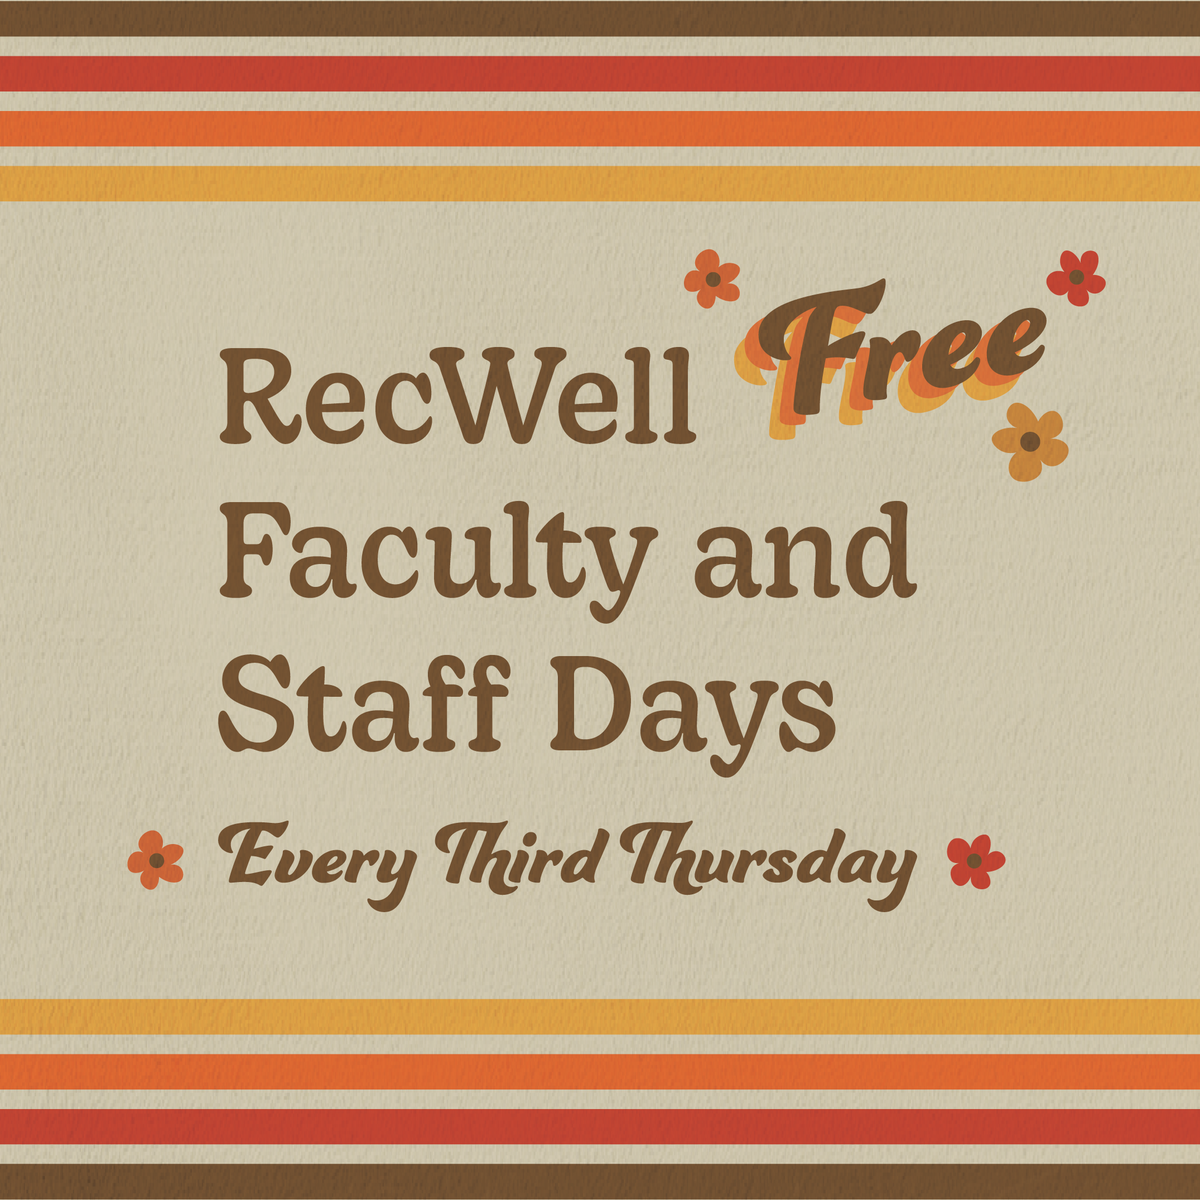 tan graphic with fall colors and flowers and the text "RecWell Free Faculty and Staff Days; Every Third Thursday"